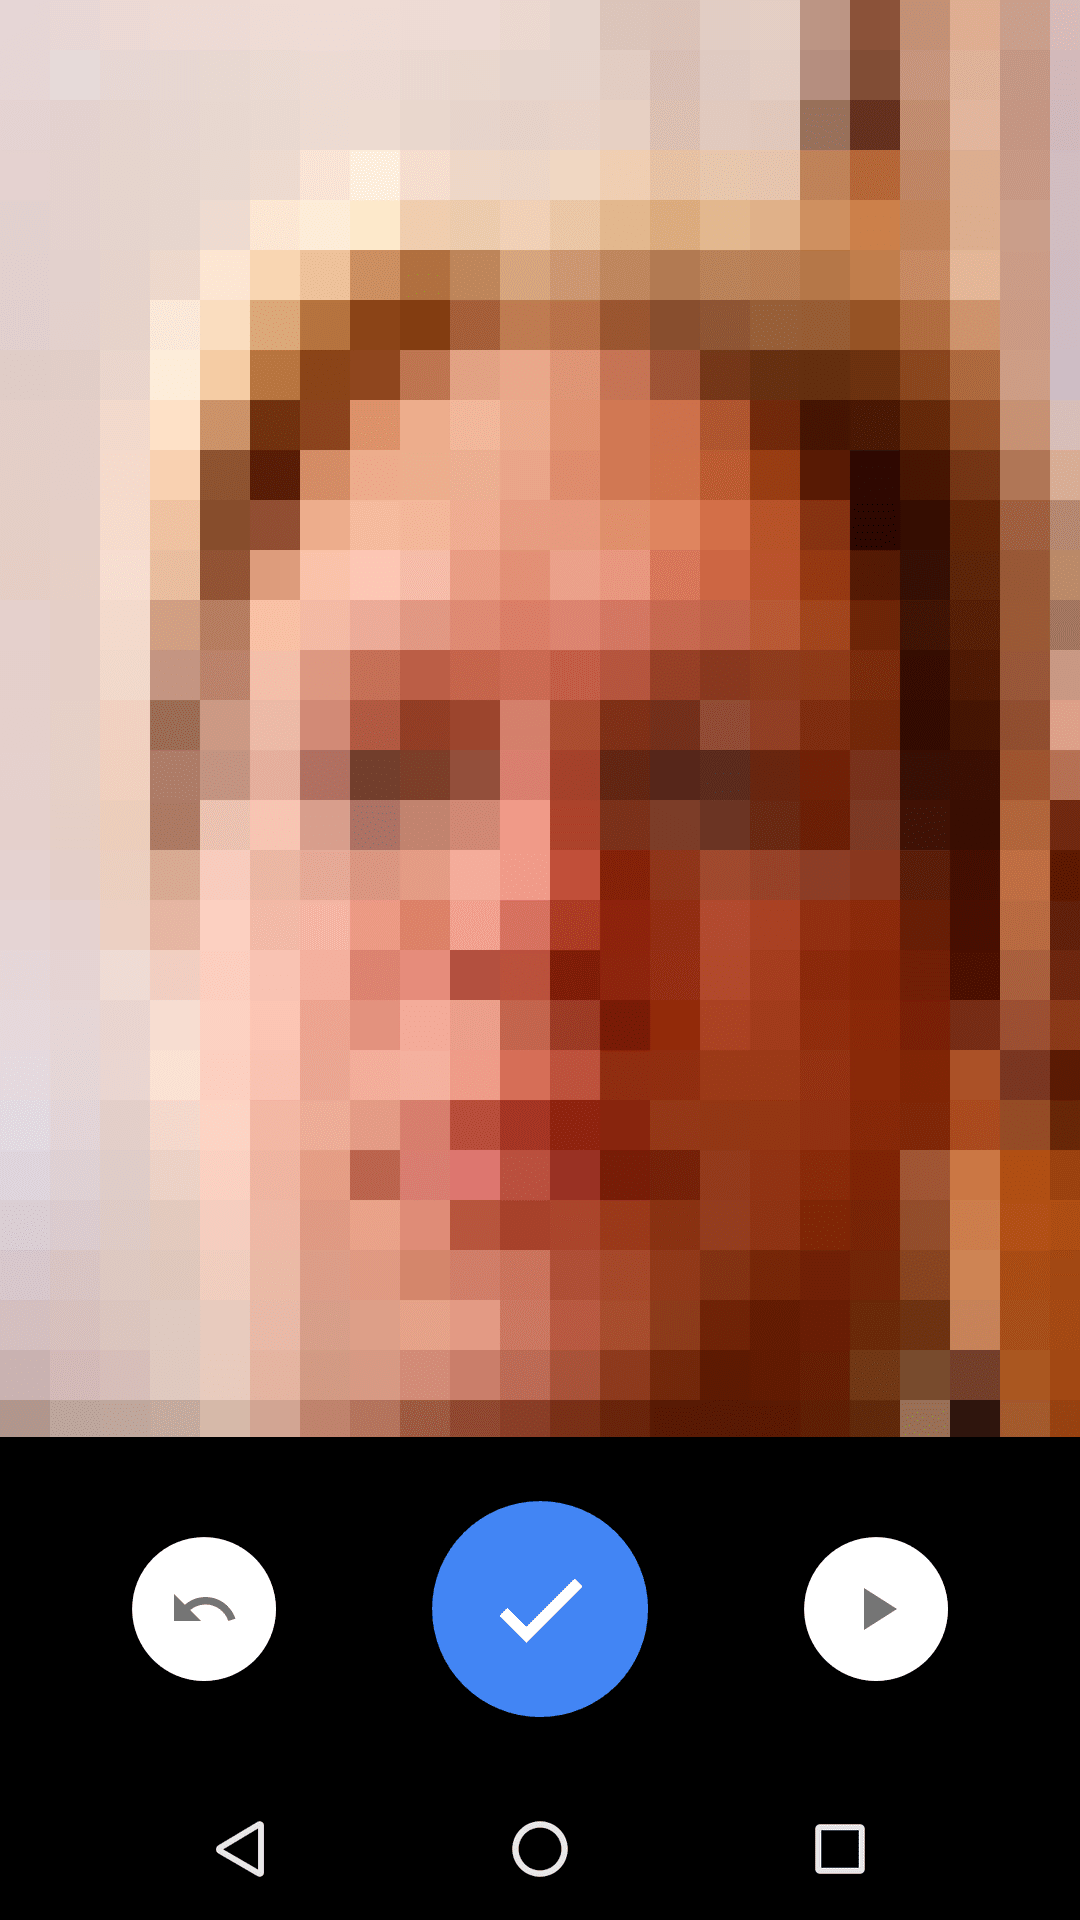 The Android camera app, in video mode. A person's face is in the camera viewer. Below the camera viewer is a large, blue checkmark button.